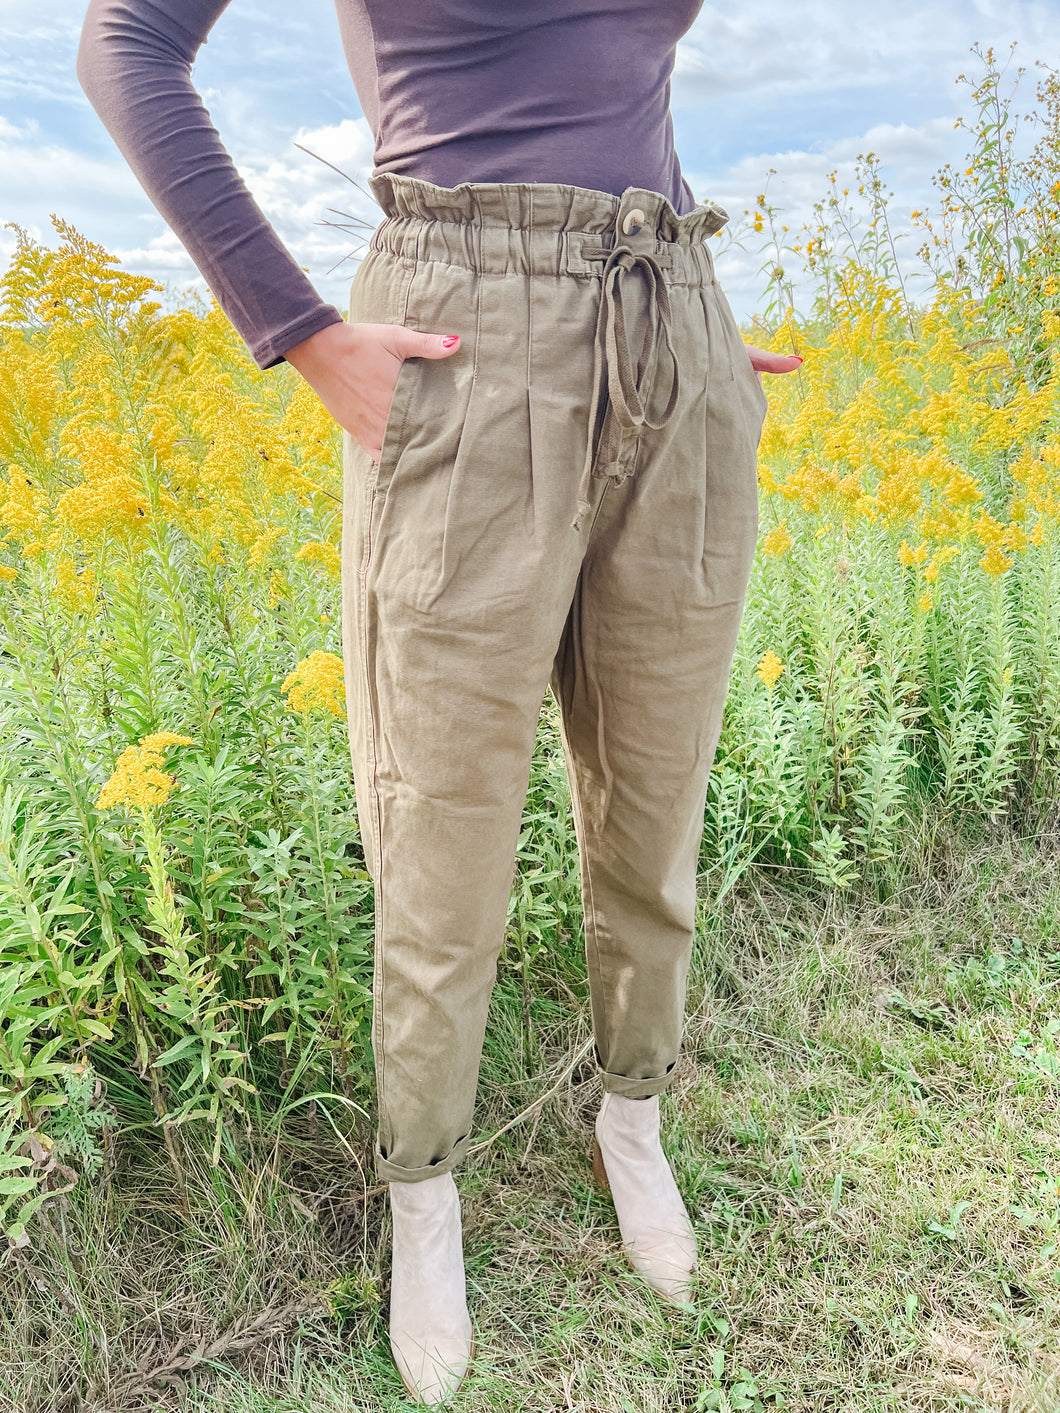 The Happy Trails Paperbag Pants